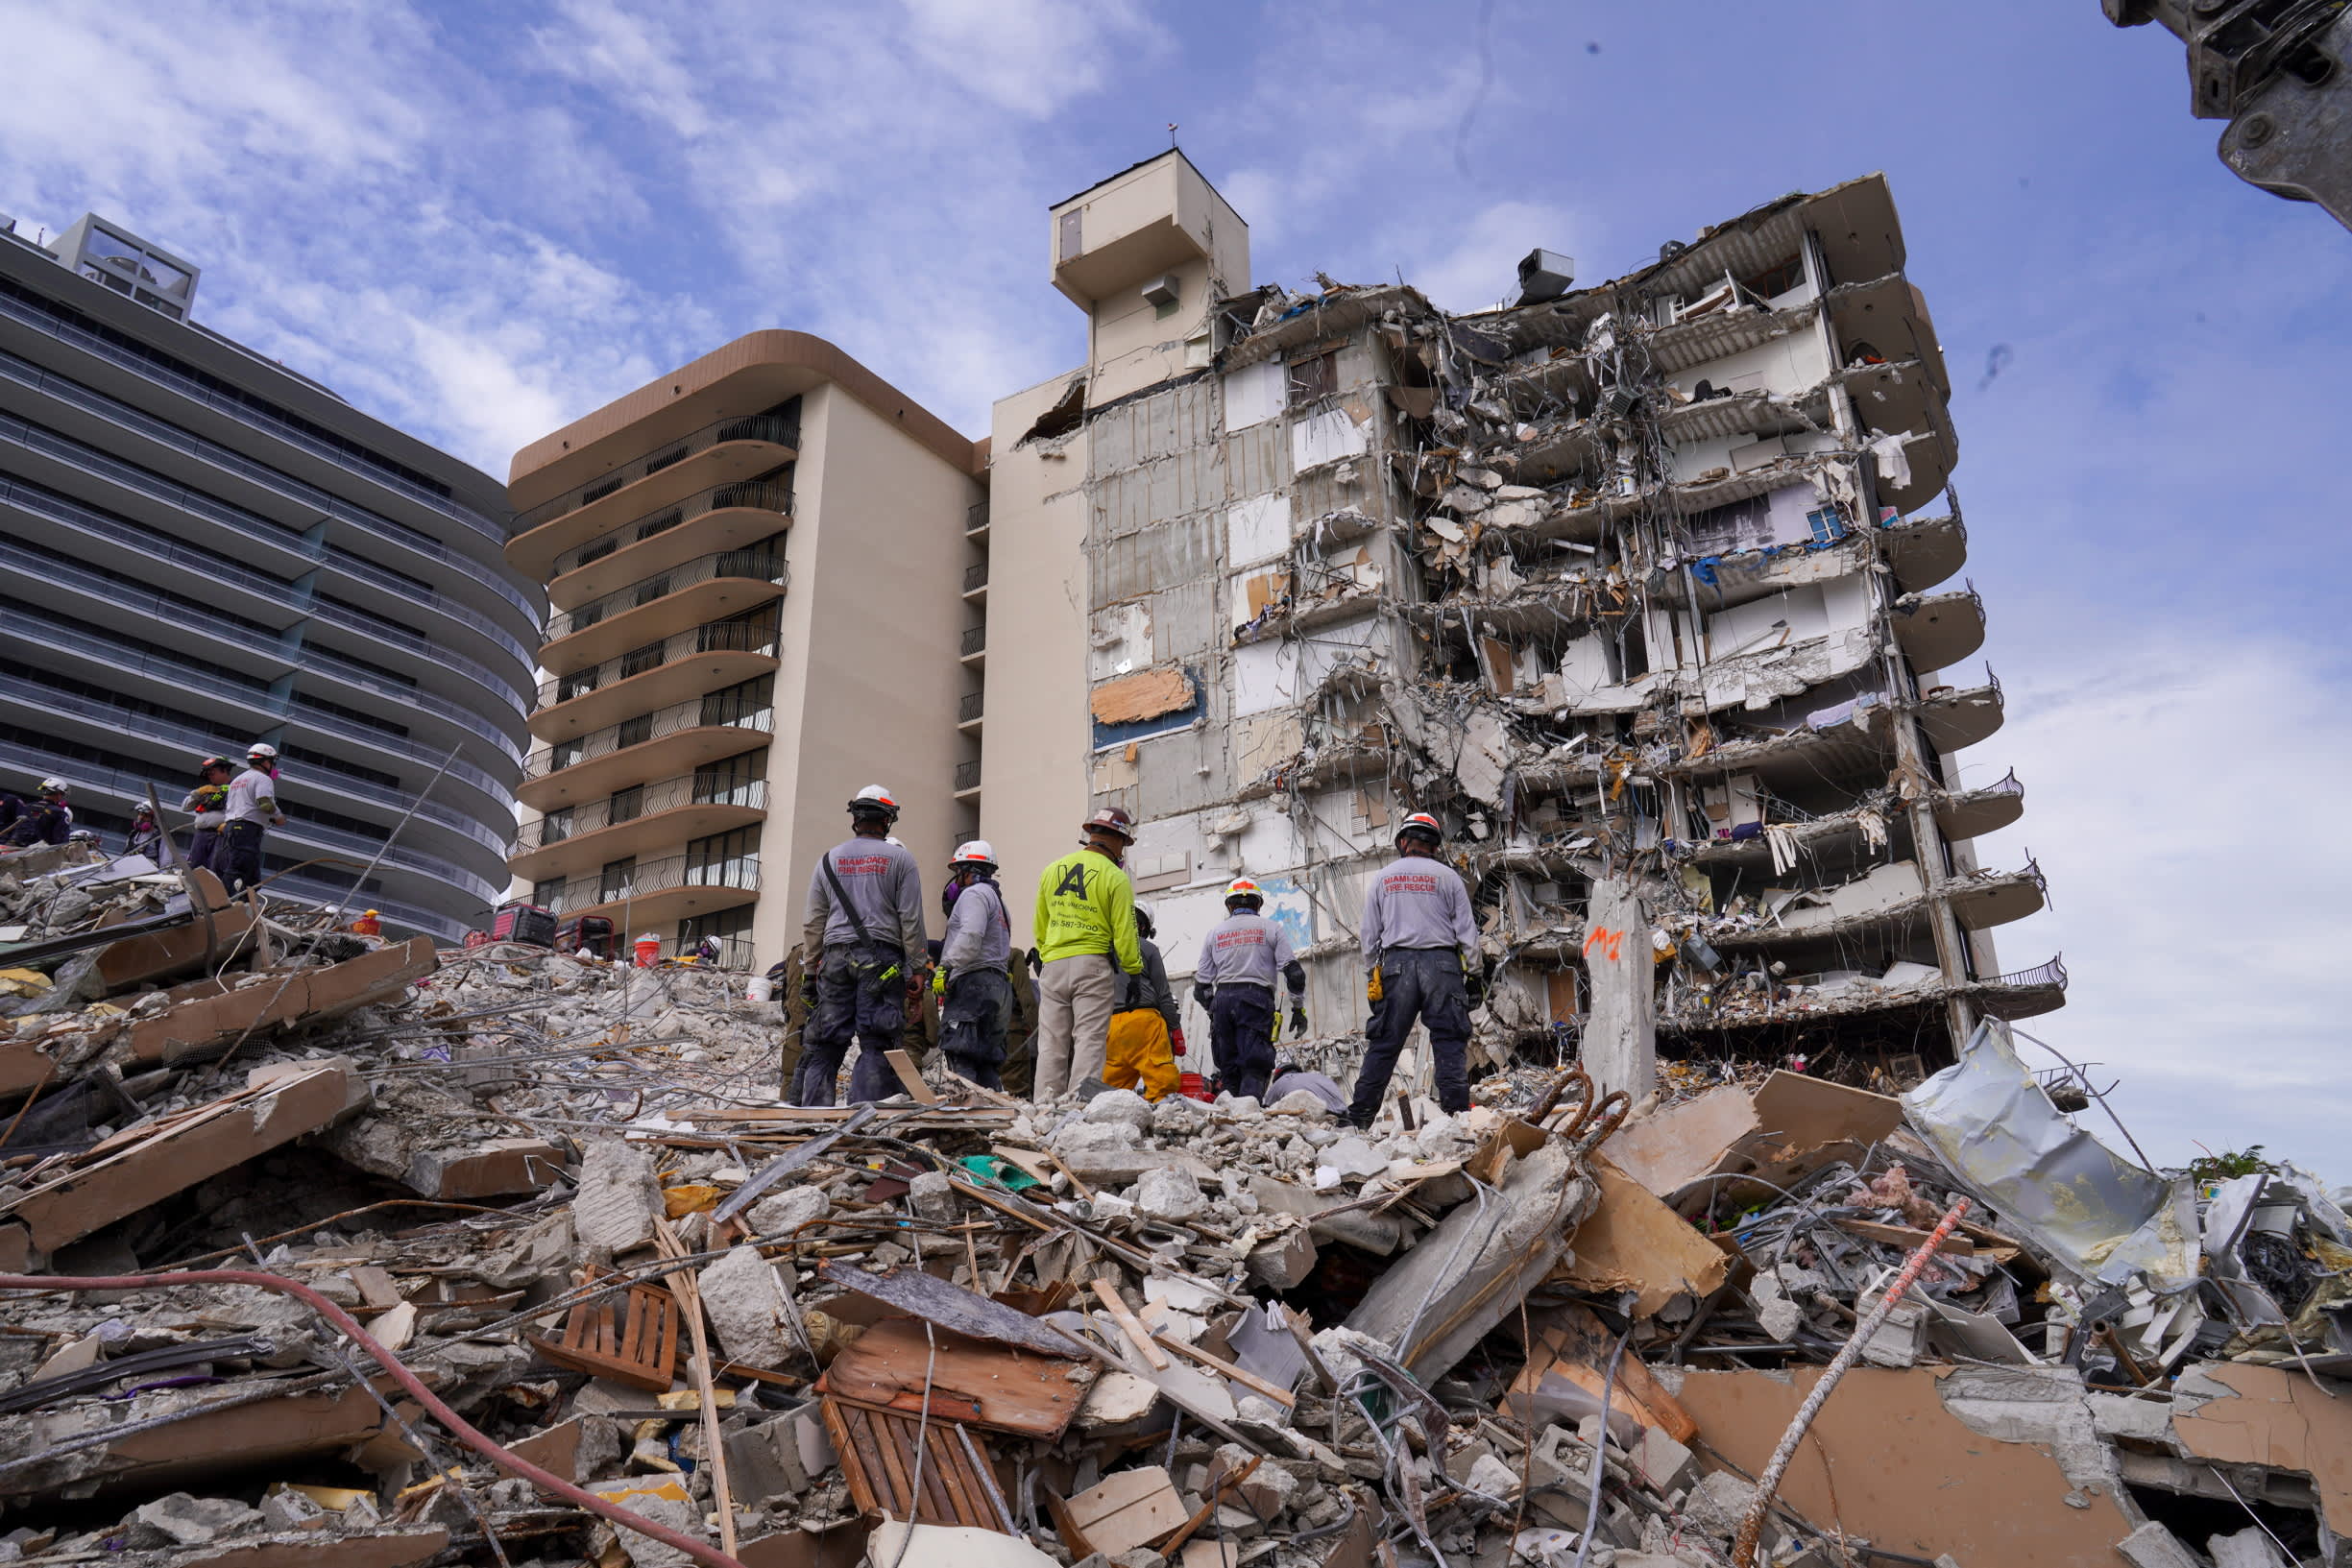 Death toll rises to 24 in Florida condo collapse, building demolition to proceed..